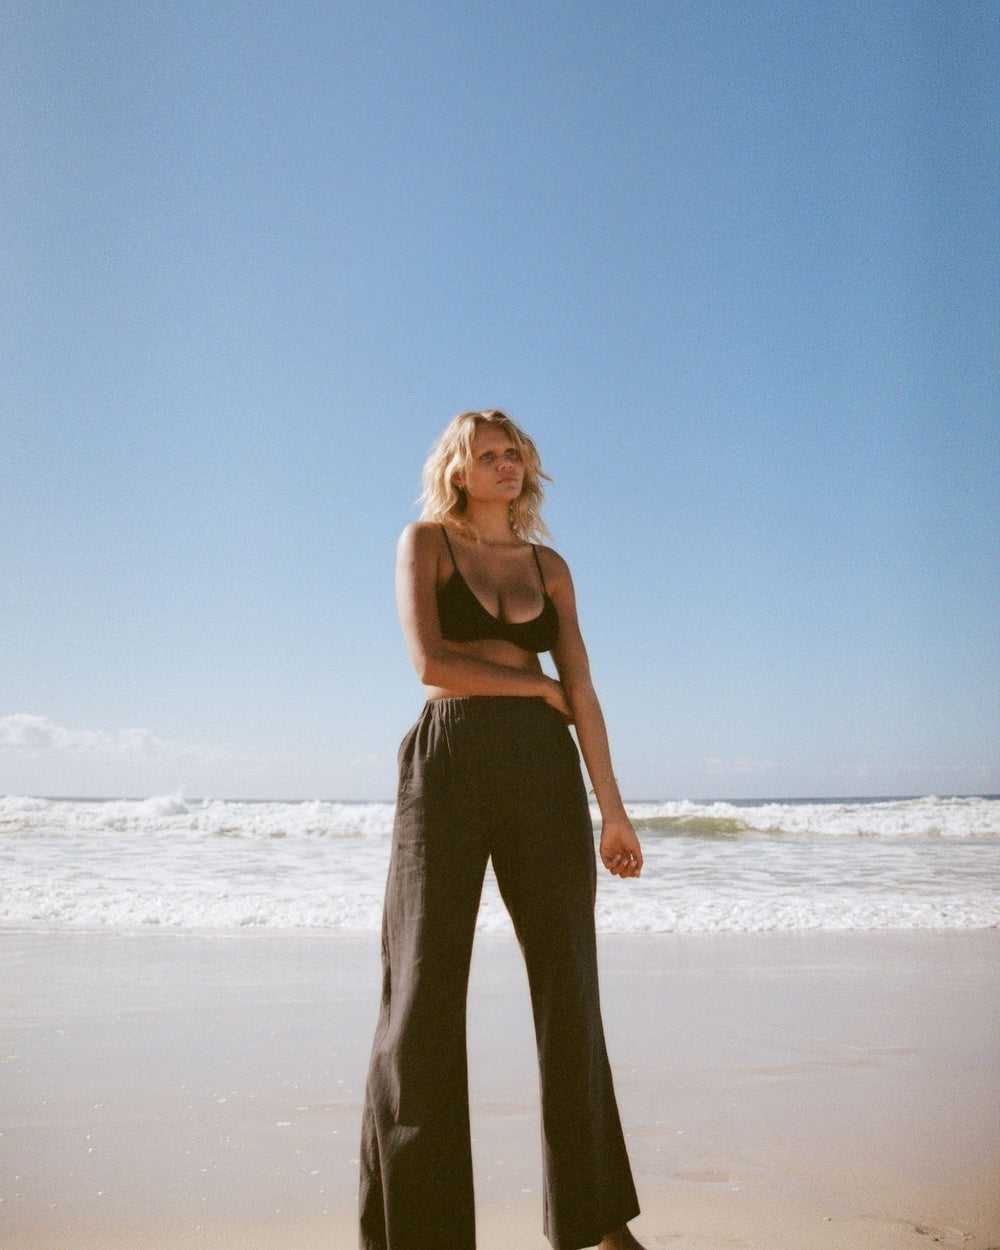 The Casual Wide Leg Pant